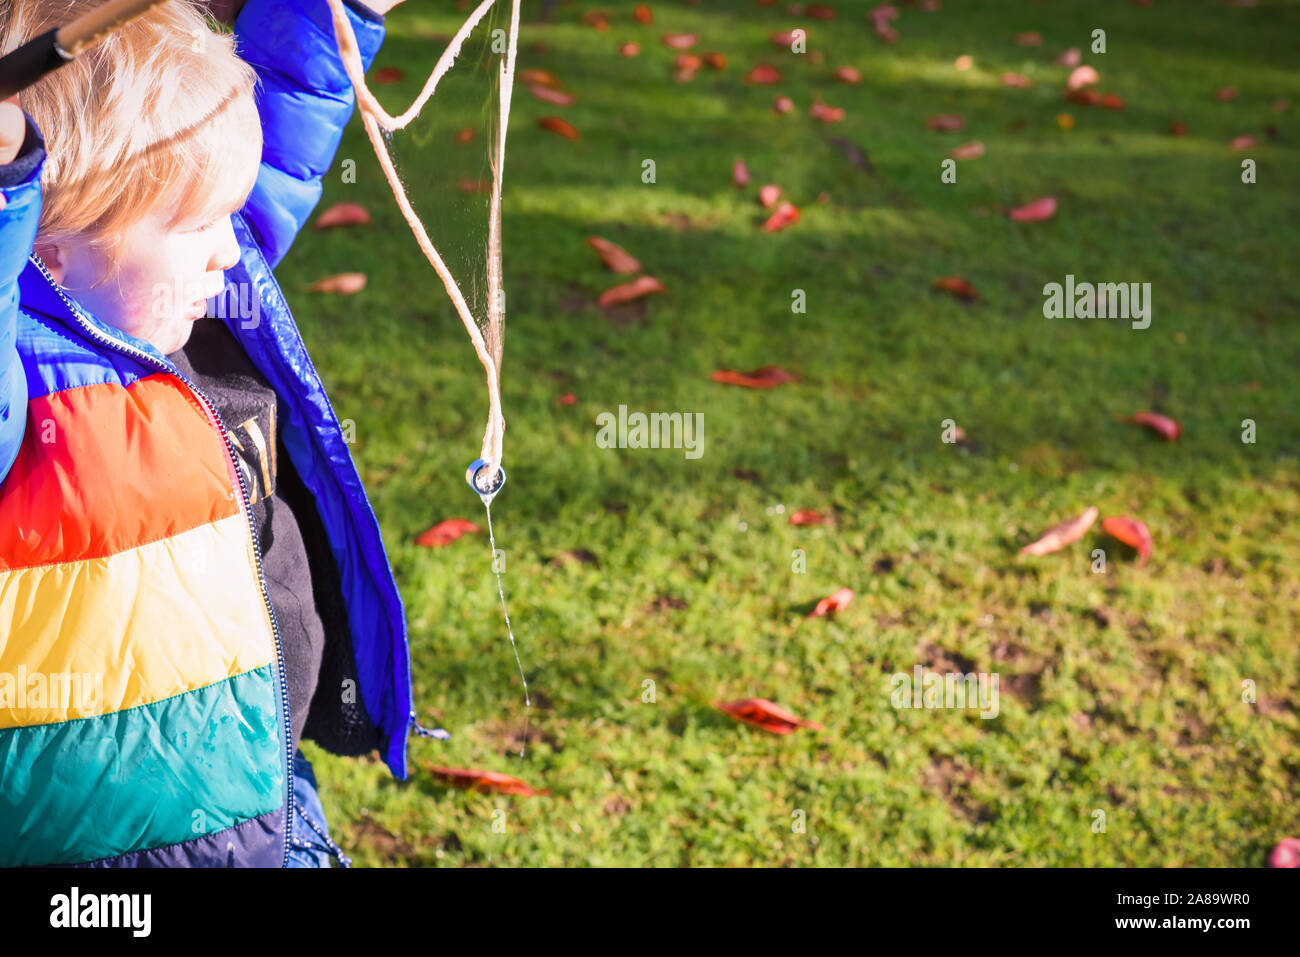 Child playing outside in a garden during day time with bubbles he is happy and running Stock Photo